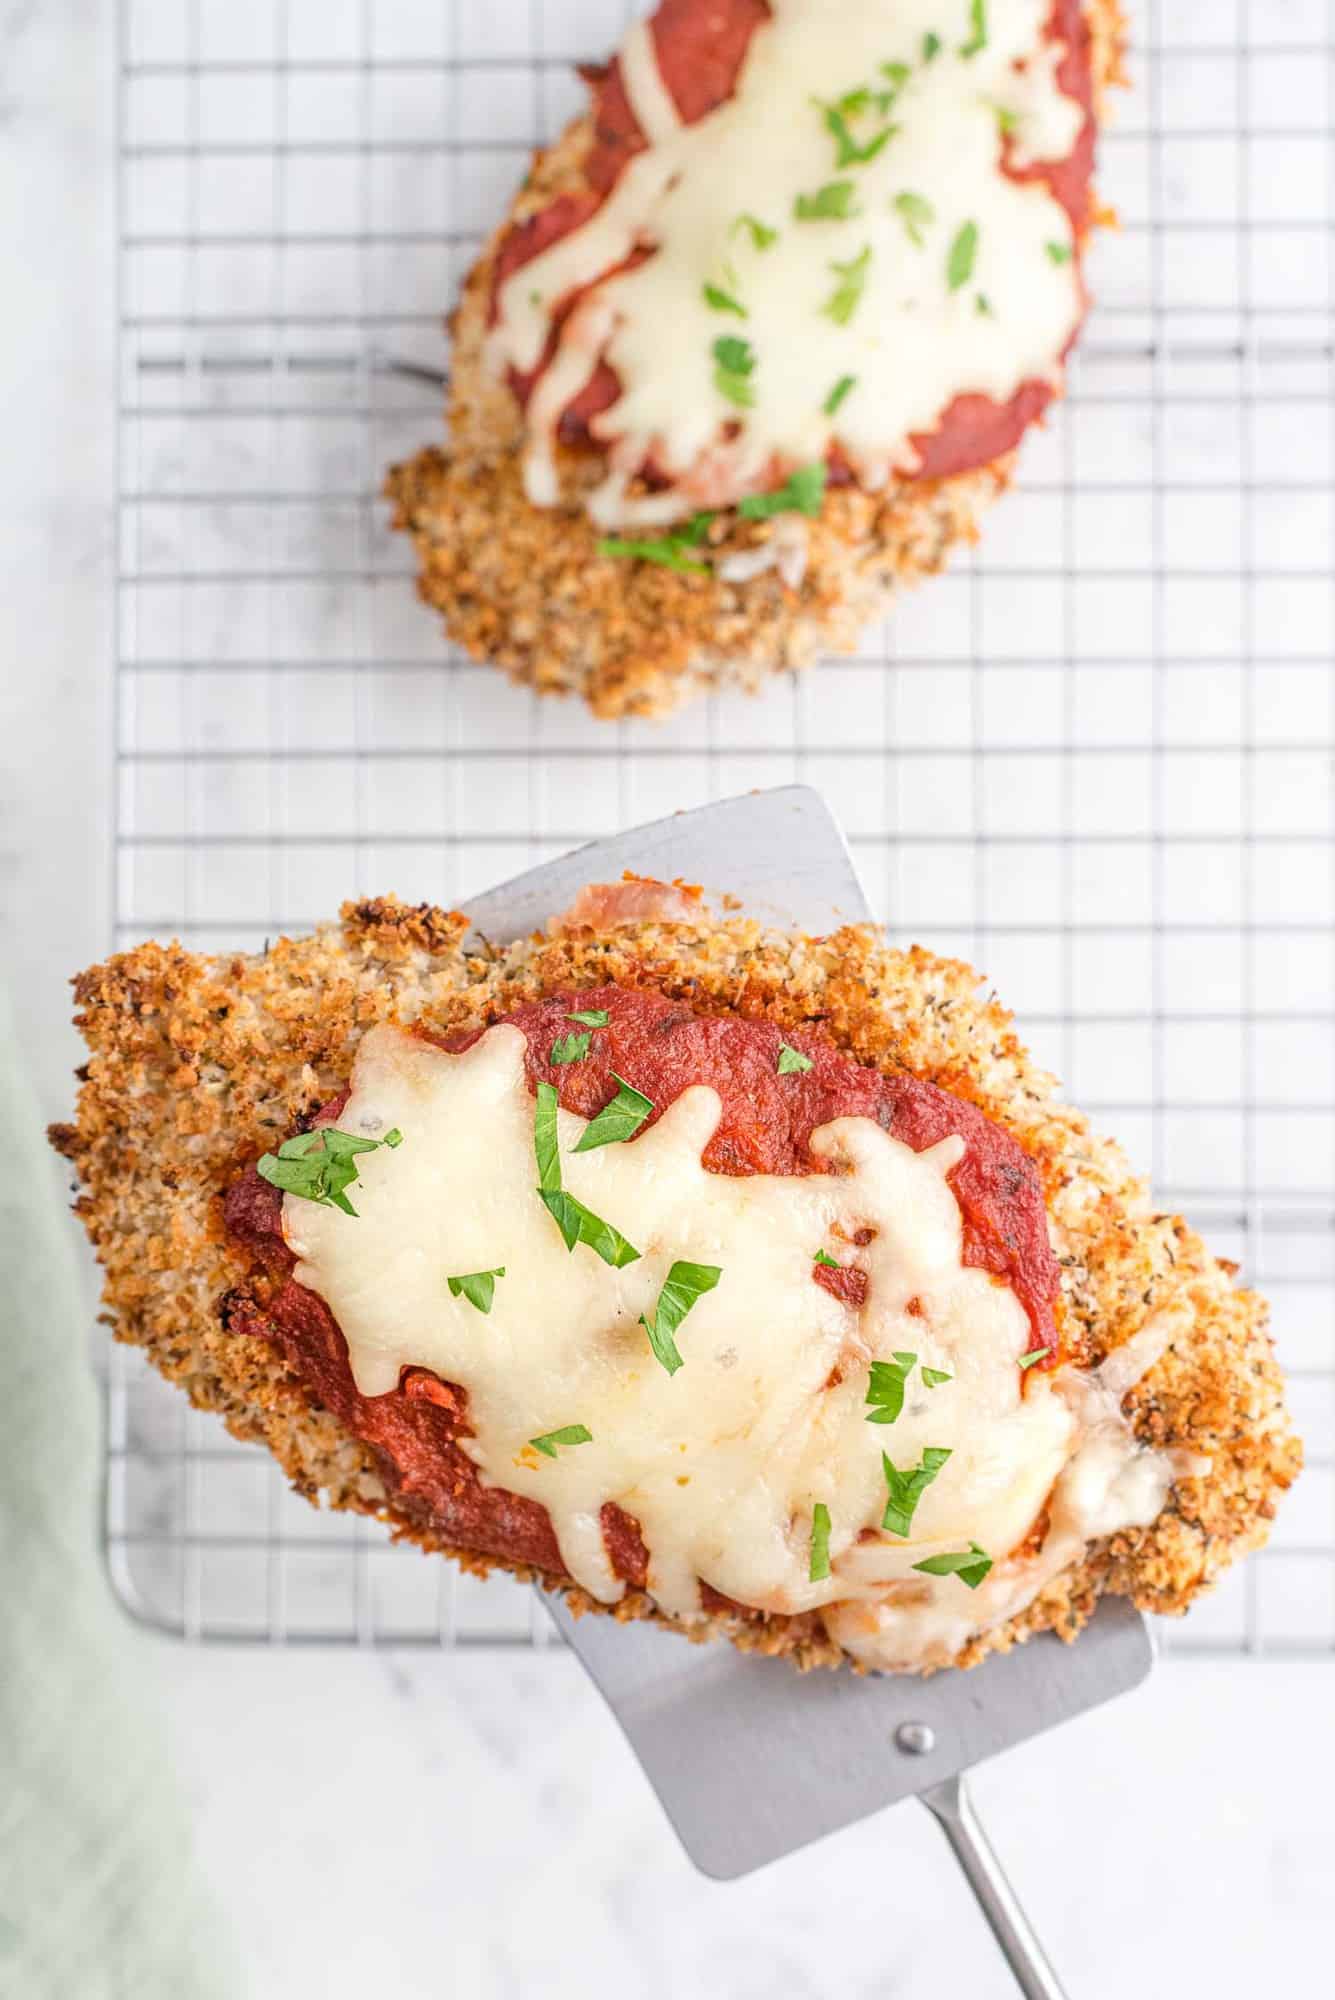 Chicken parmesan being taken off a metal baking rack with a metal spatula.